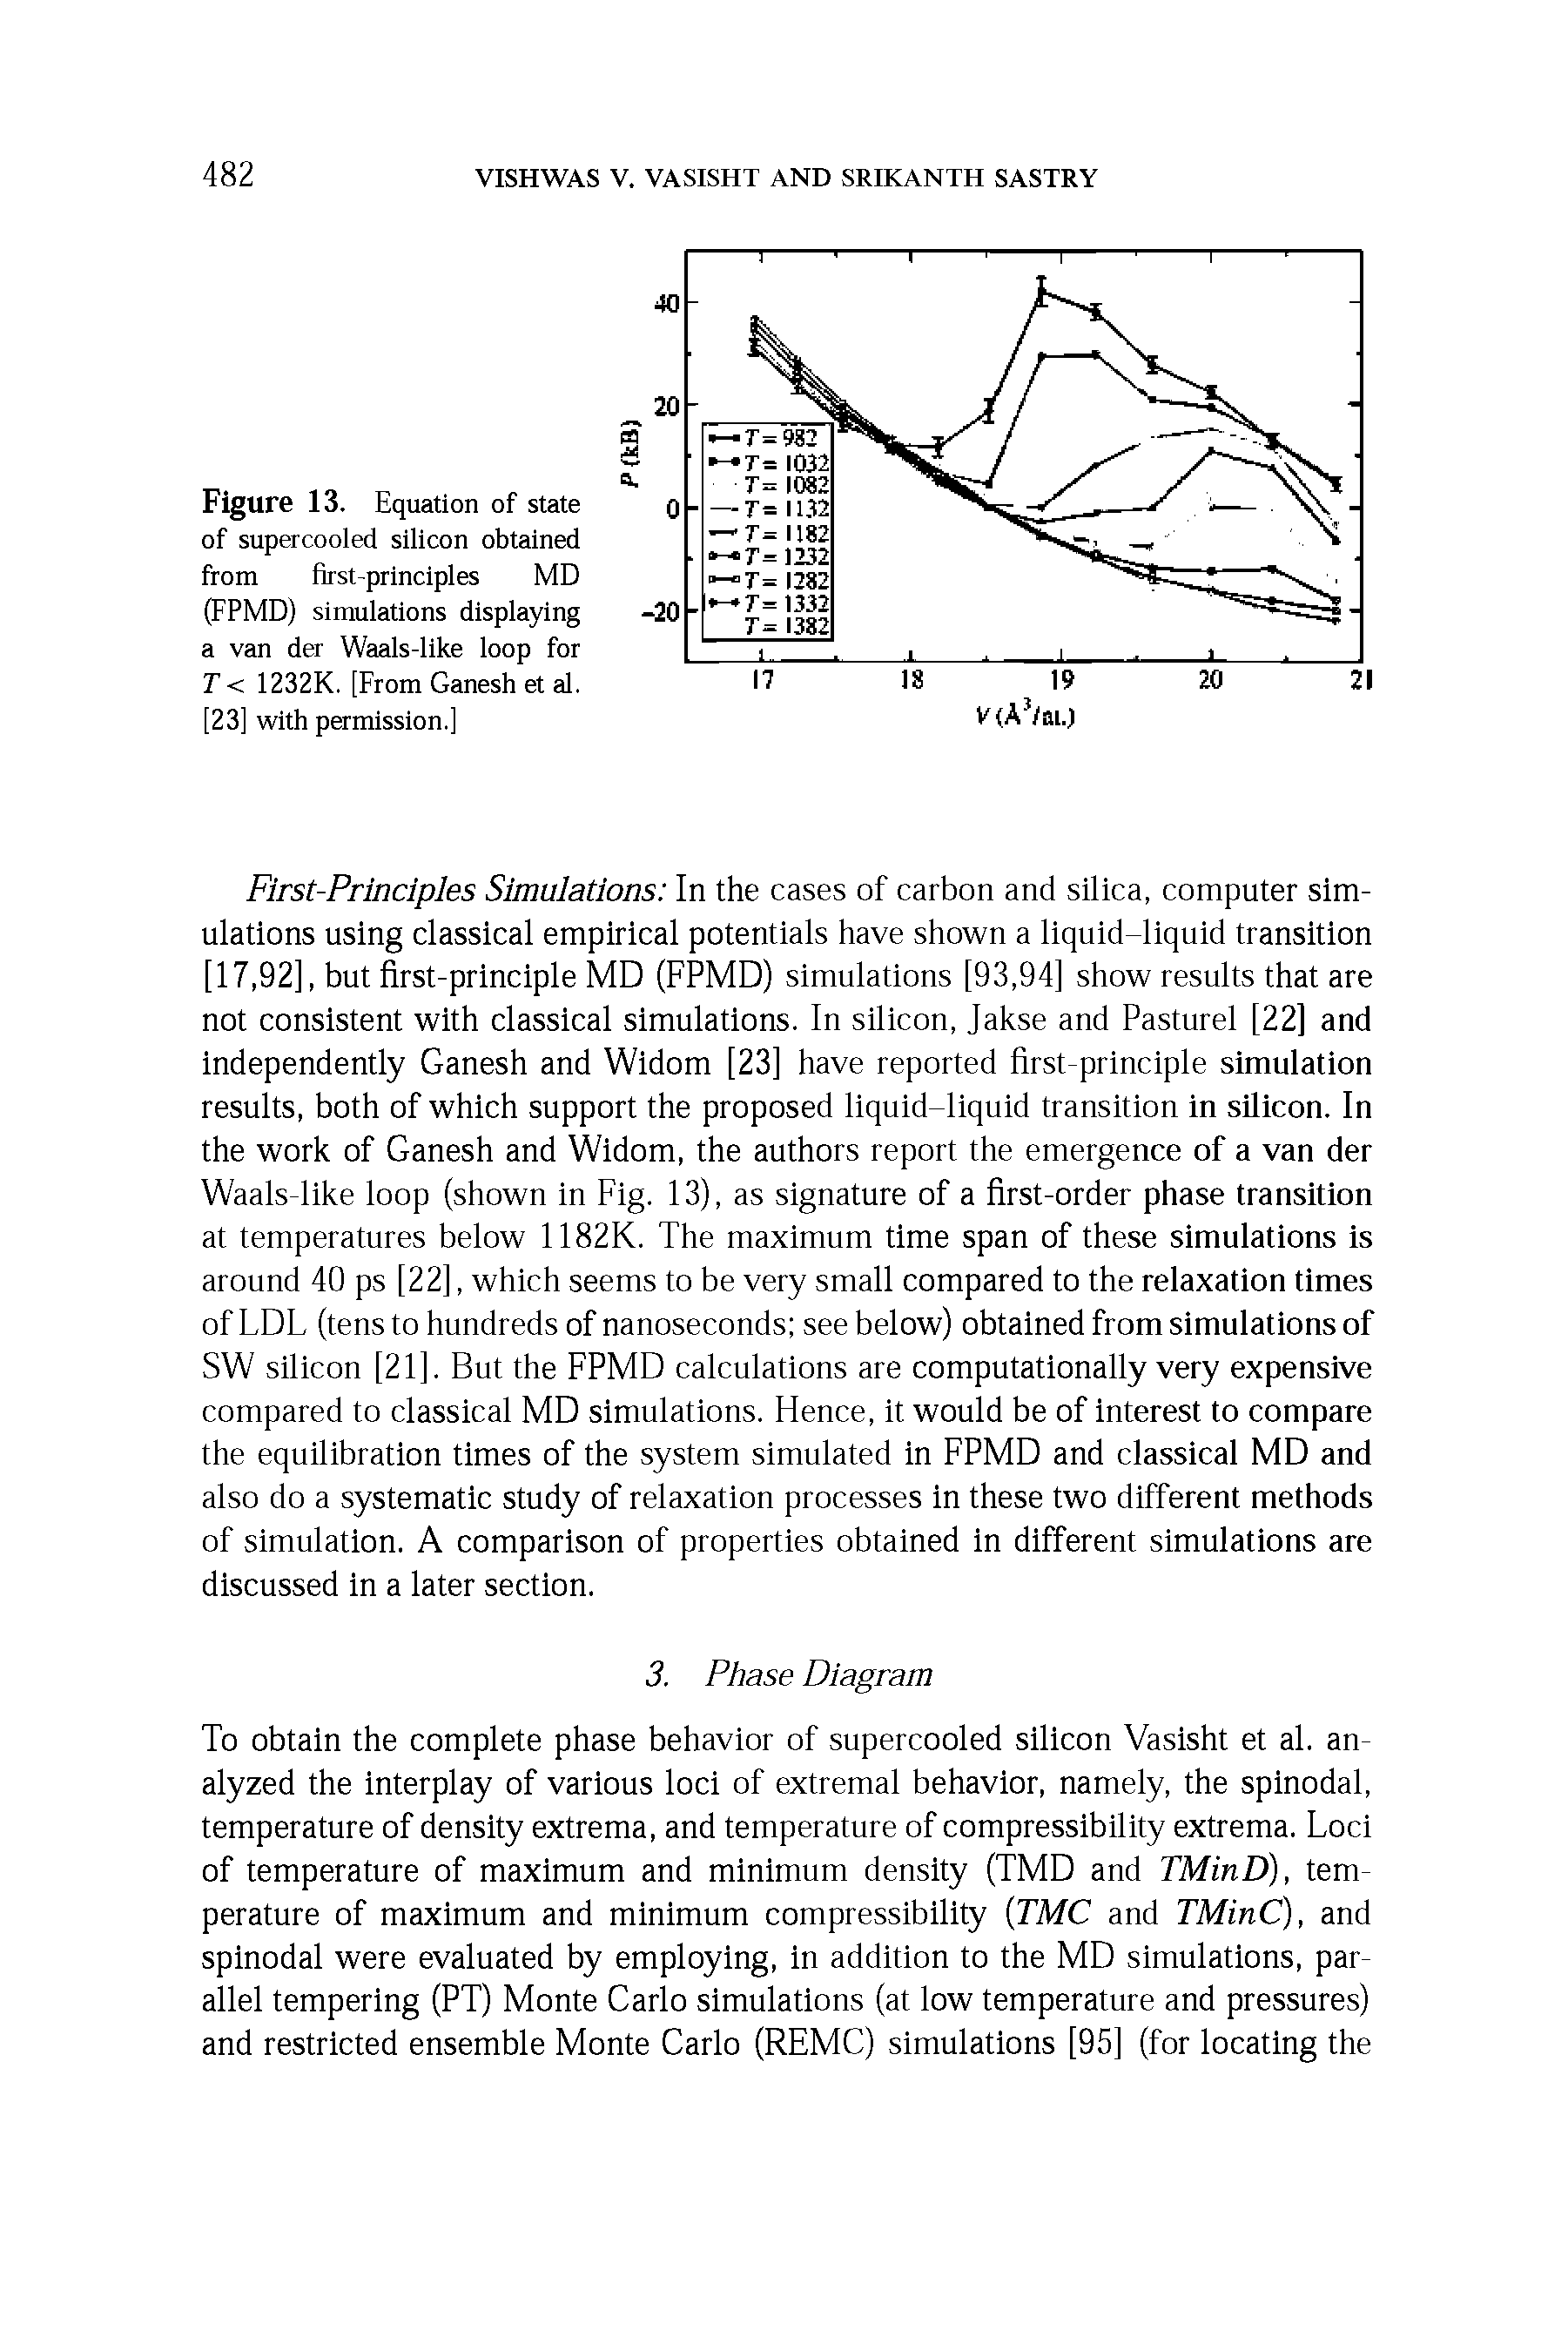 Figure 13. Equation of state of supercooled silicon obtained from first-principles MD (FPMD) simulations displaying a van der Waals-like loop for T < 1232K. [From Ganesh et al. [23] with permission.]...